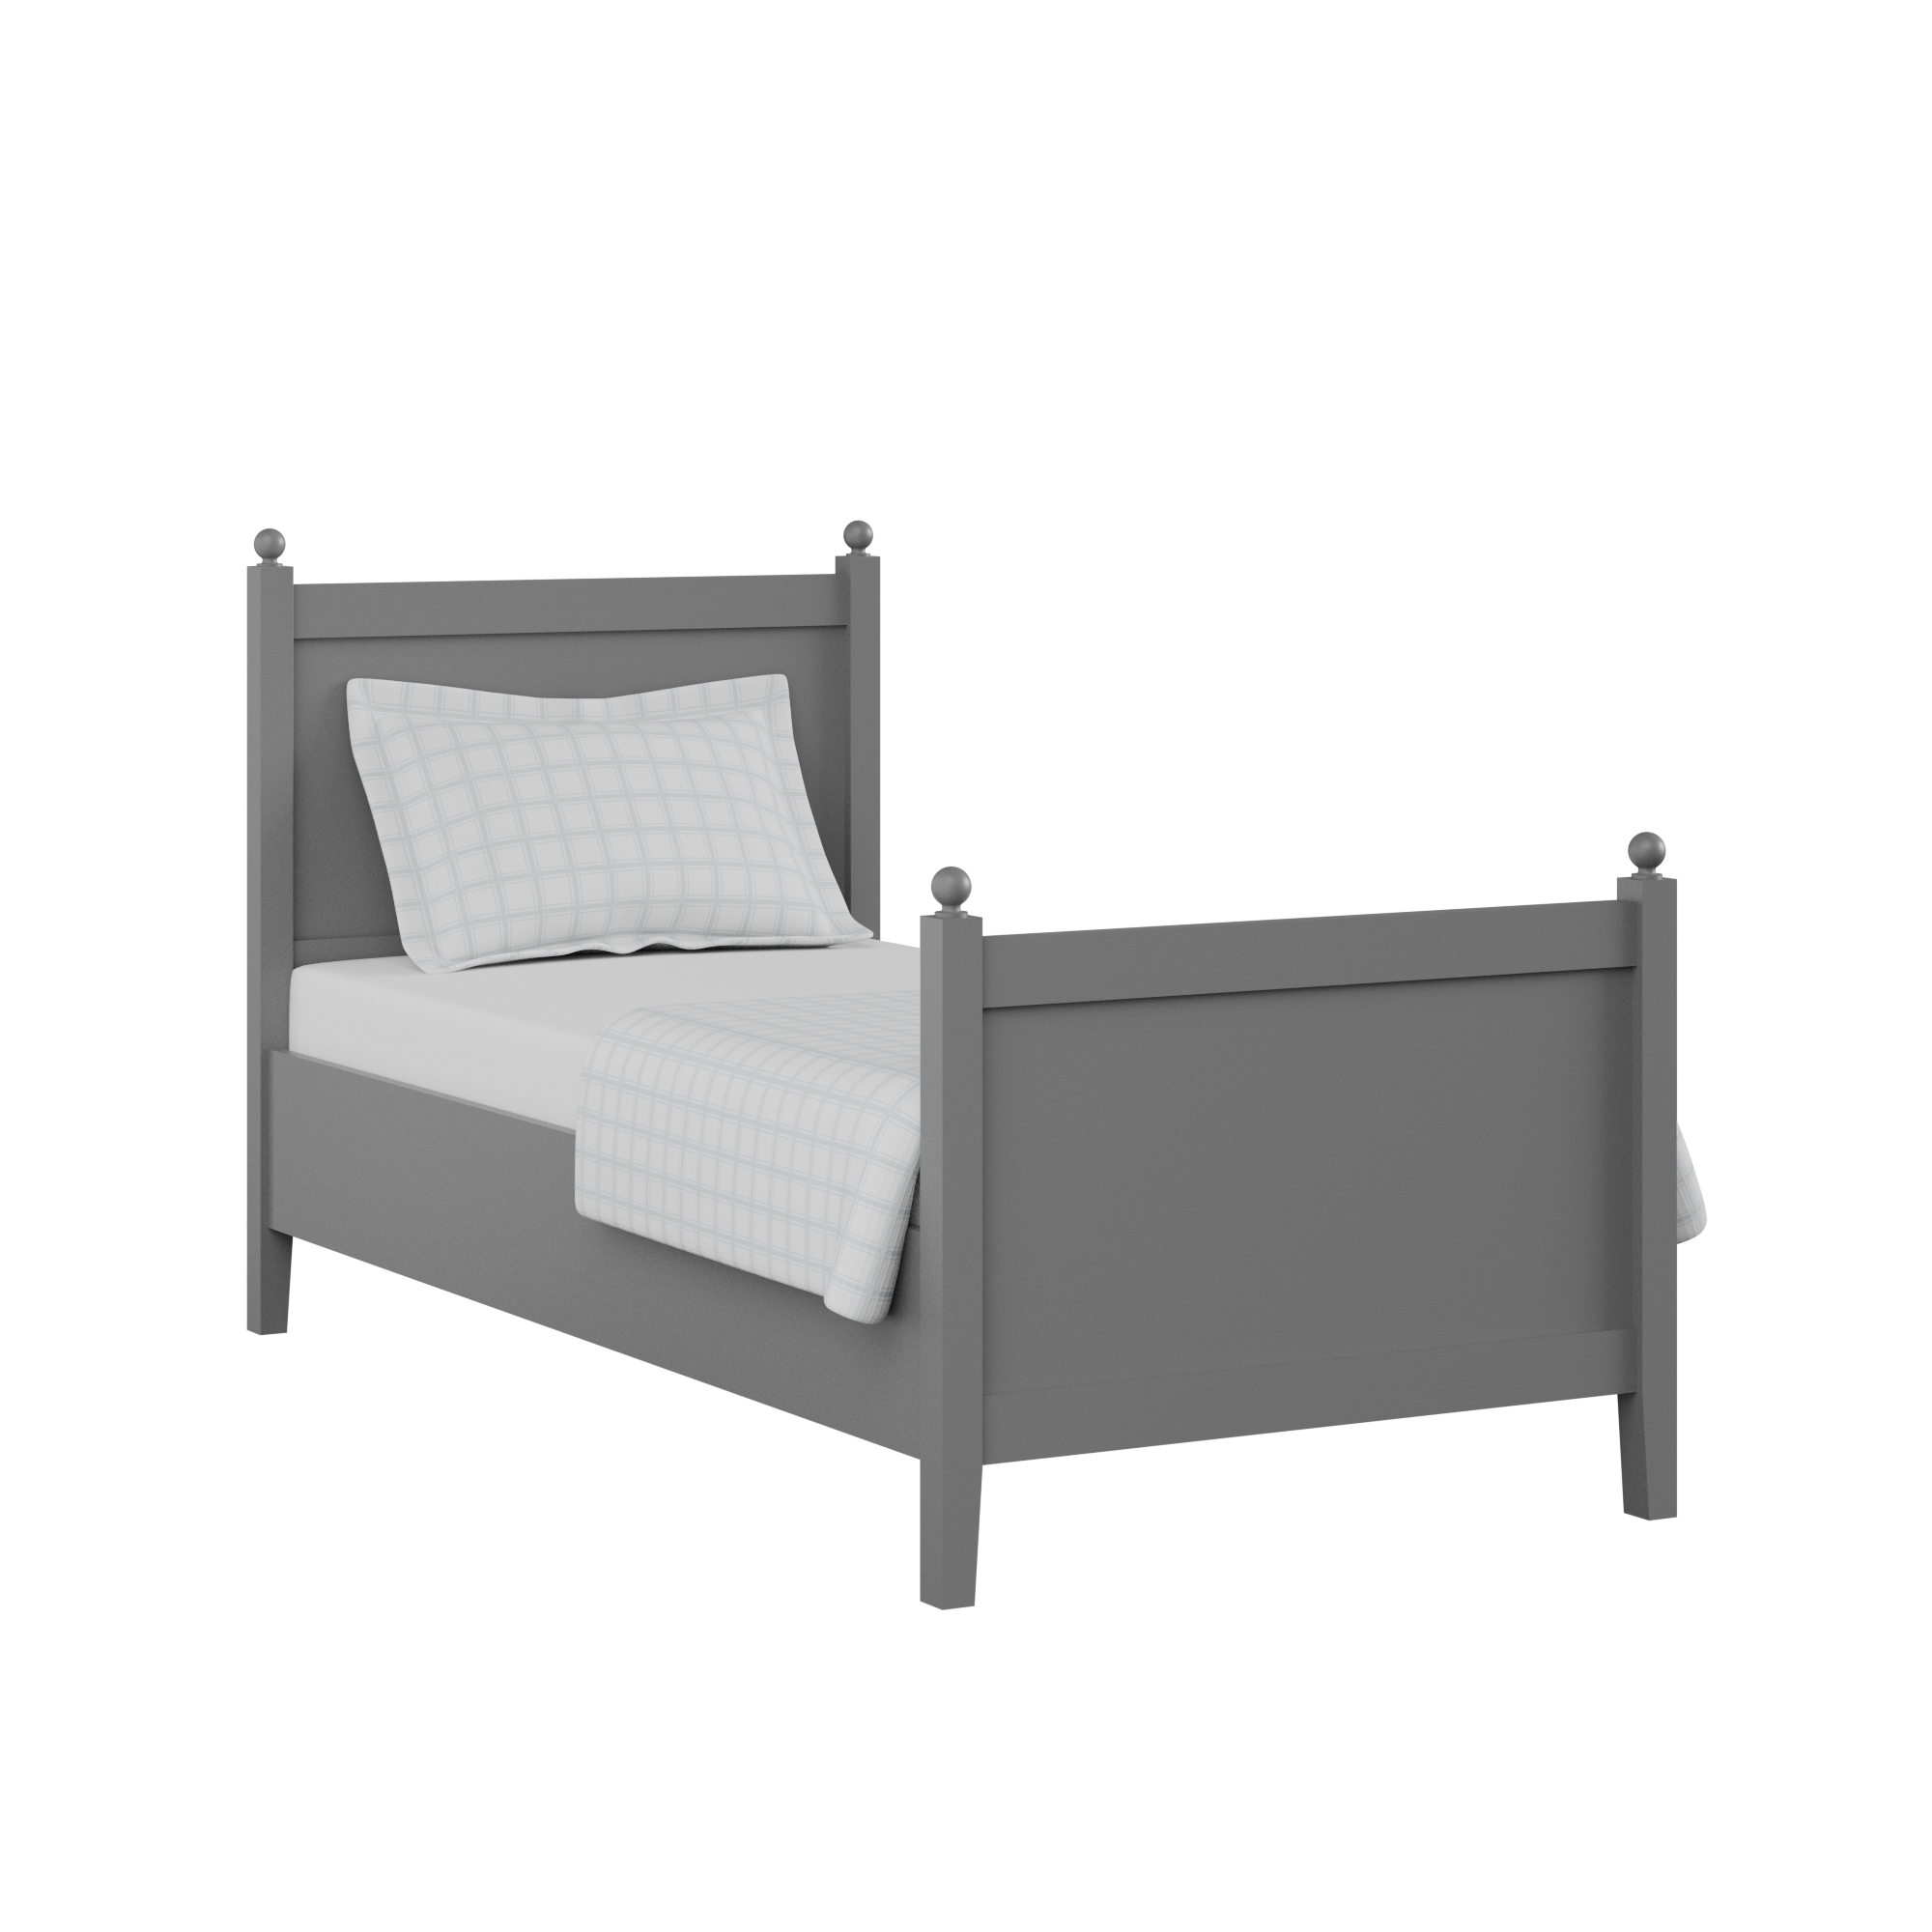 Marbella Painted single painted wood bed in grey with Juno mattress